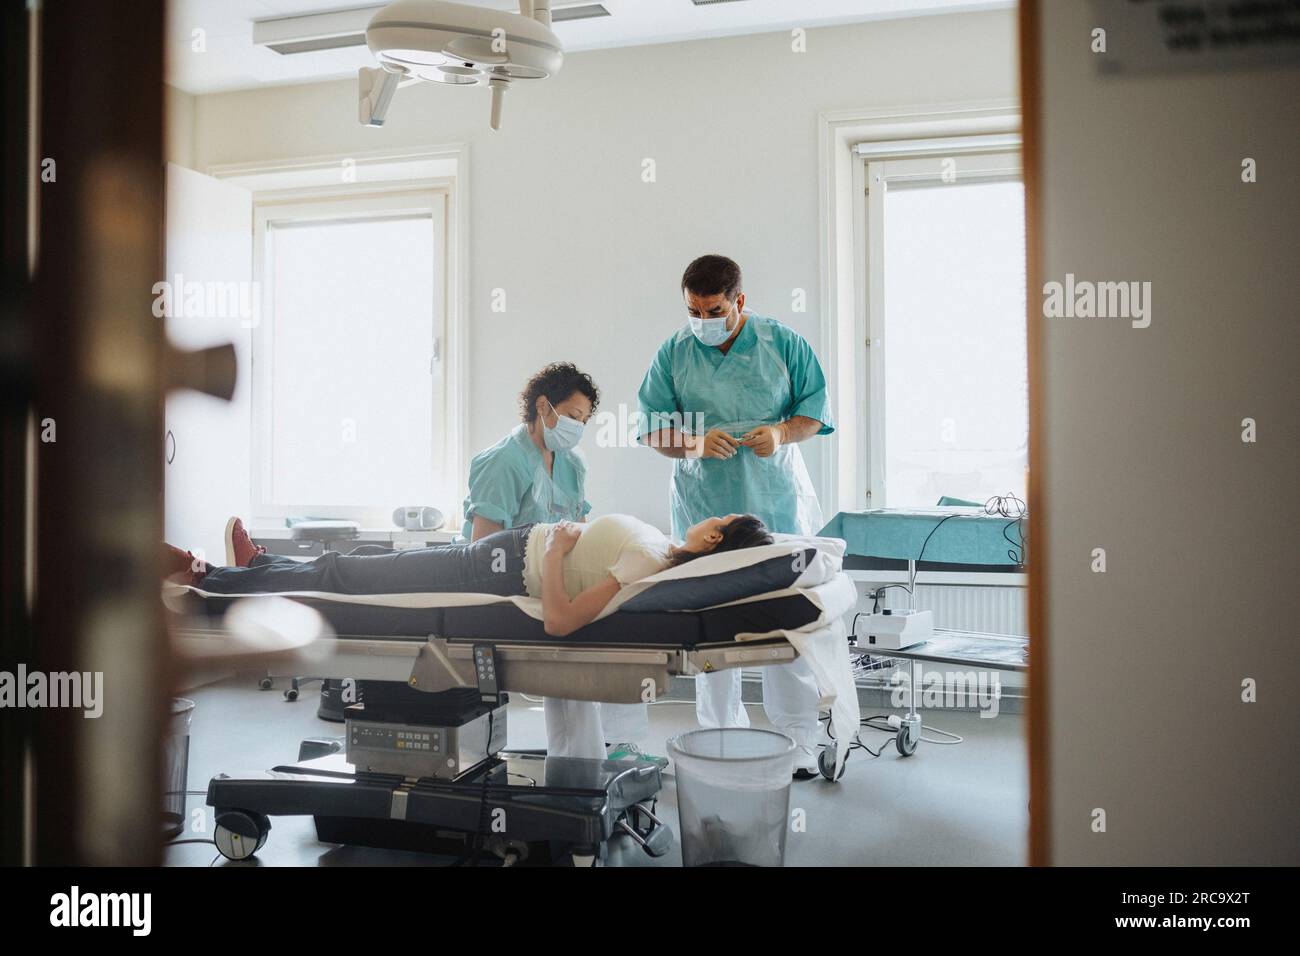 Male And Female Surgeons Examining Patient On Bed In Hospital Stock Photo Alamy